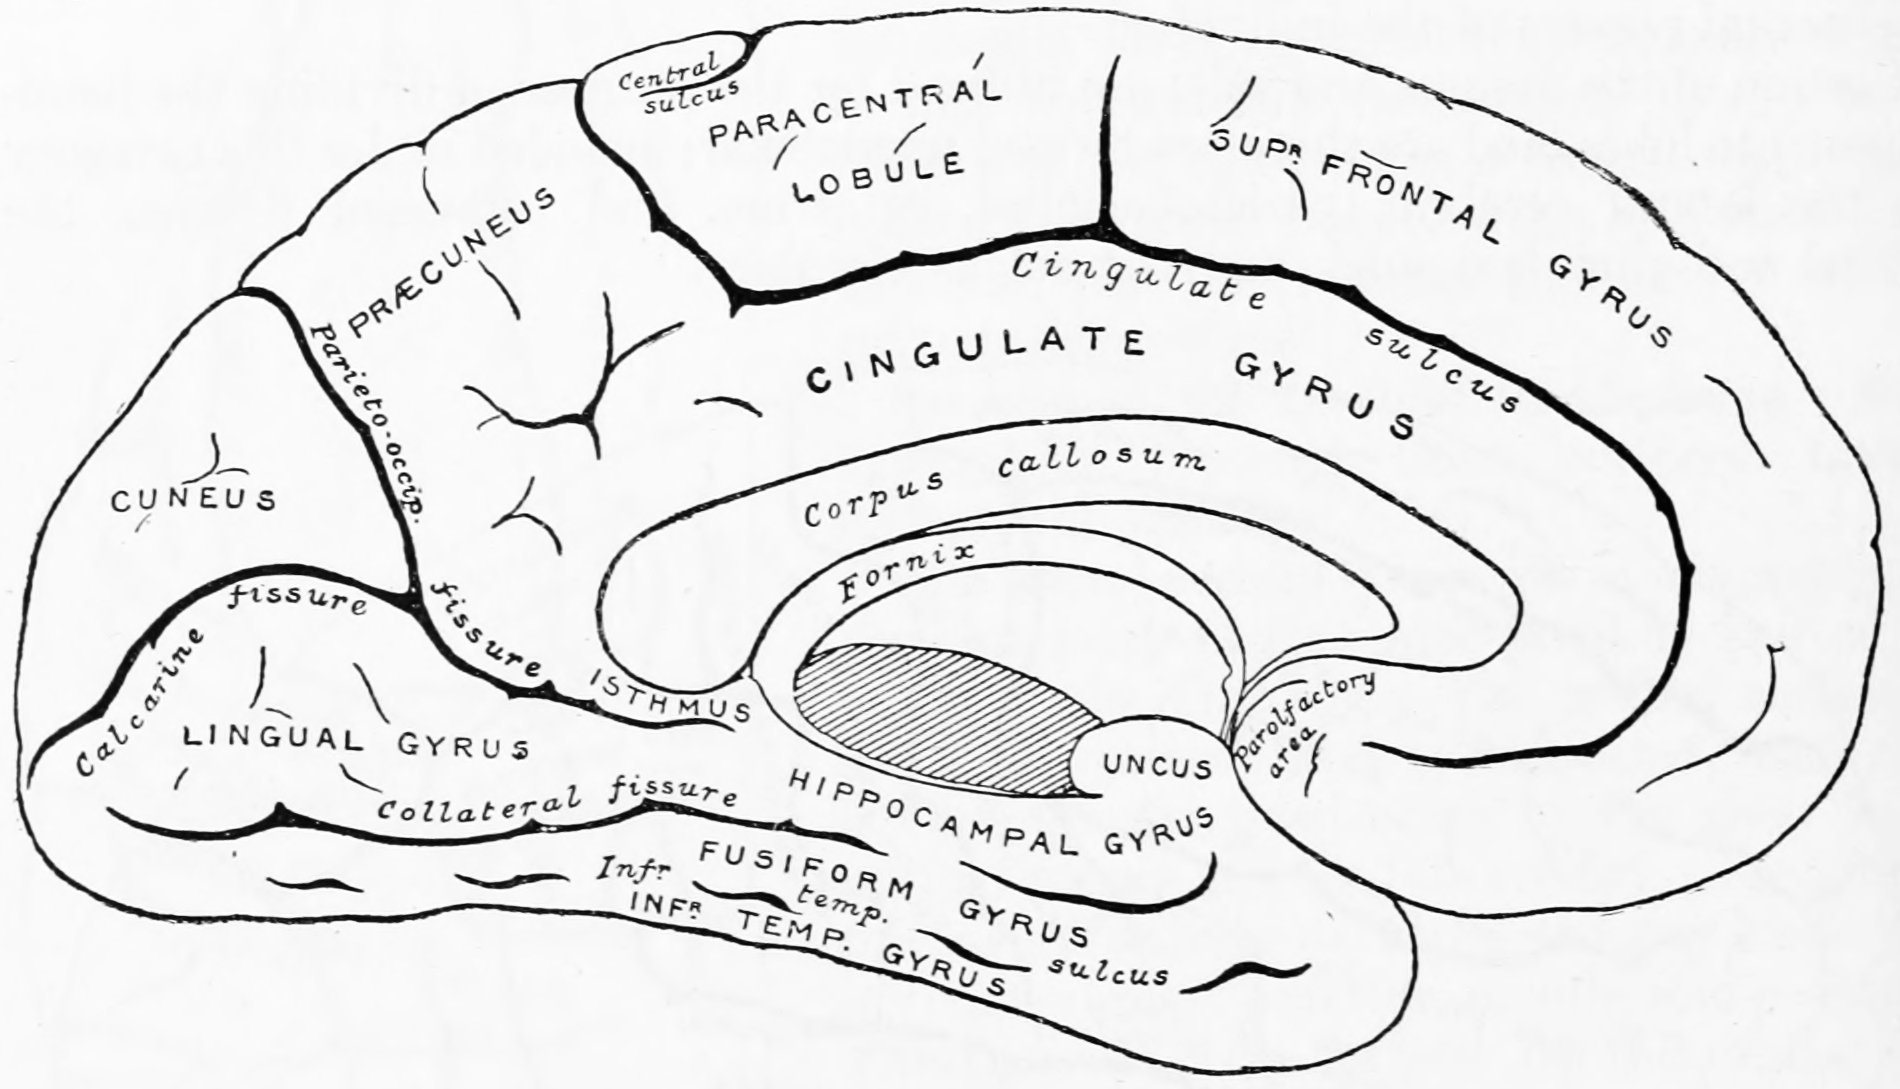 Diagram showing a medial view of the ridges (gyri) and grooves (sulci) of the left hemisphere of the brain. From Gray Henry, Anatomy of the Human Body. 20th Edition, Lea & Febiger, Philadelphia & New York, 1918